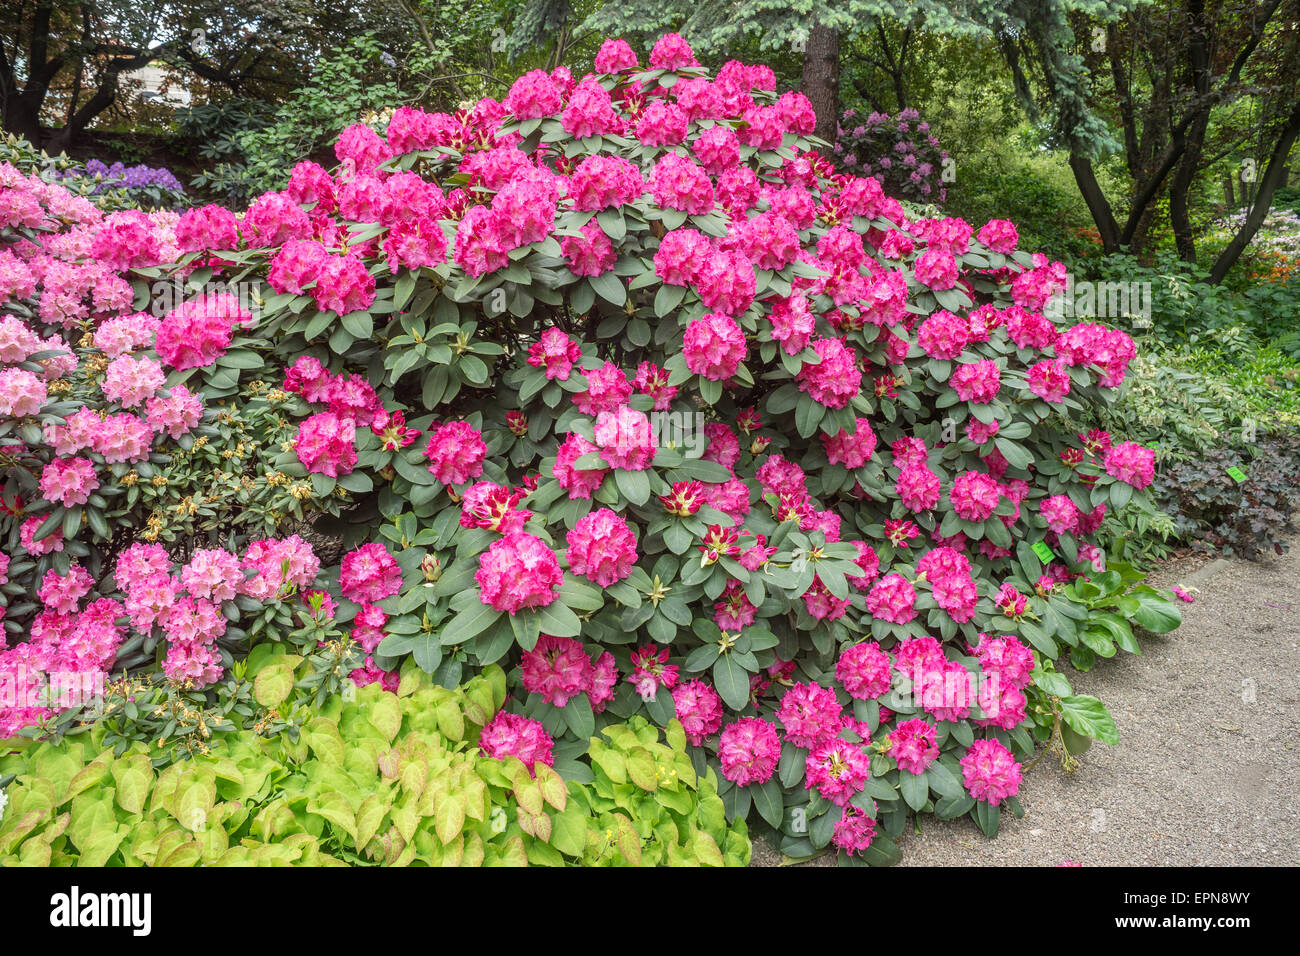 Pink and red rhododendron shrub in full bloom Stock Photo